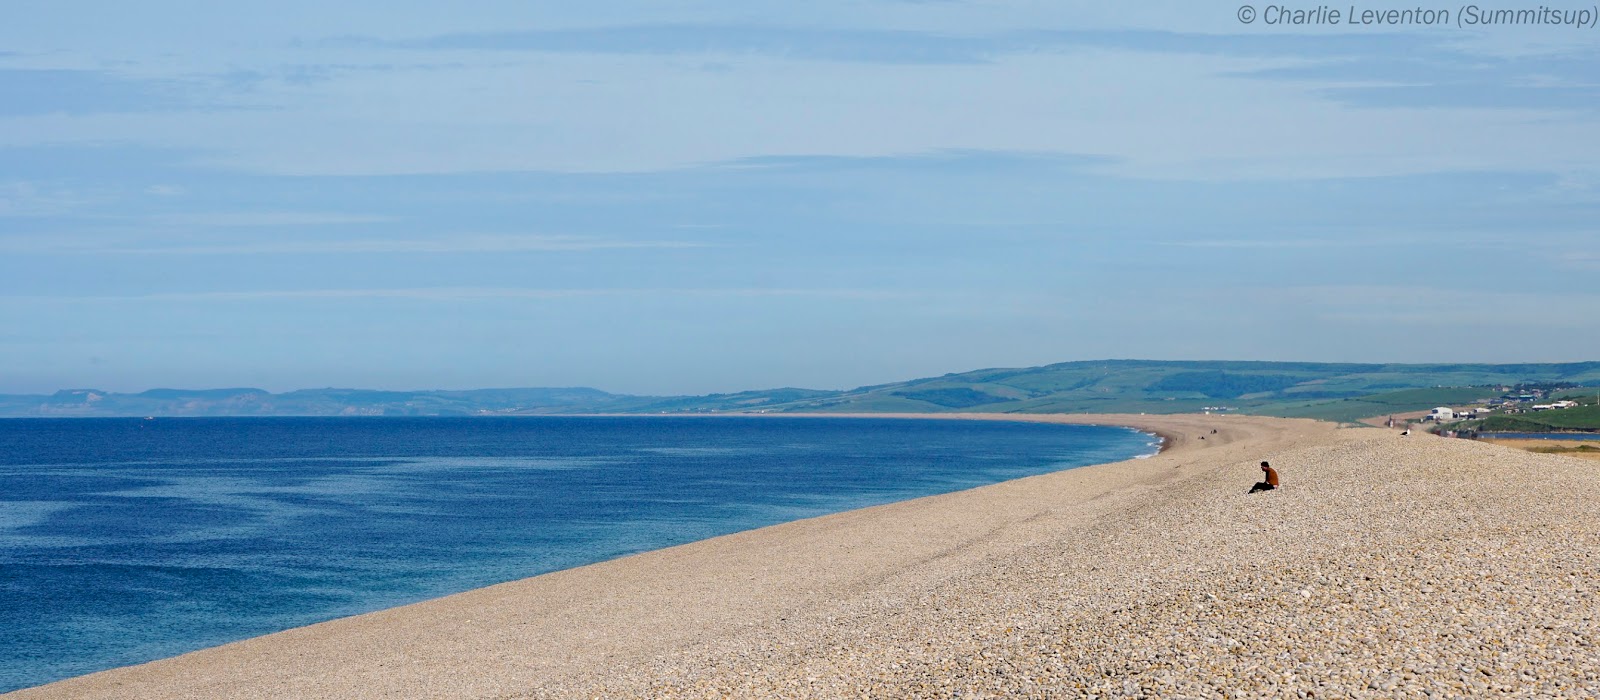 Chesil Cove - The Encyclopaedia of Portland History